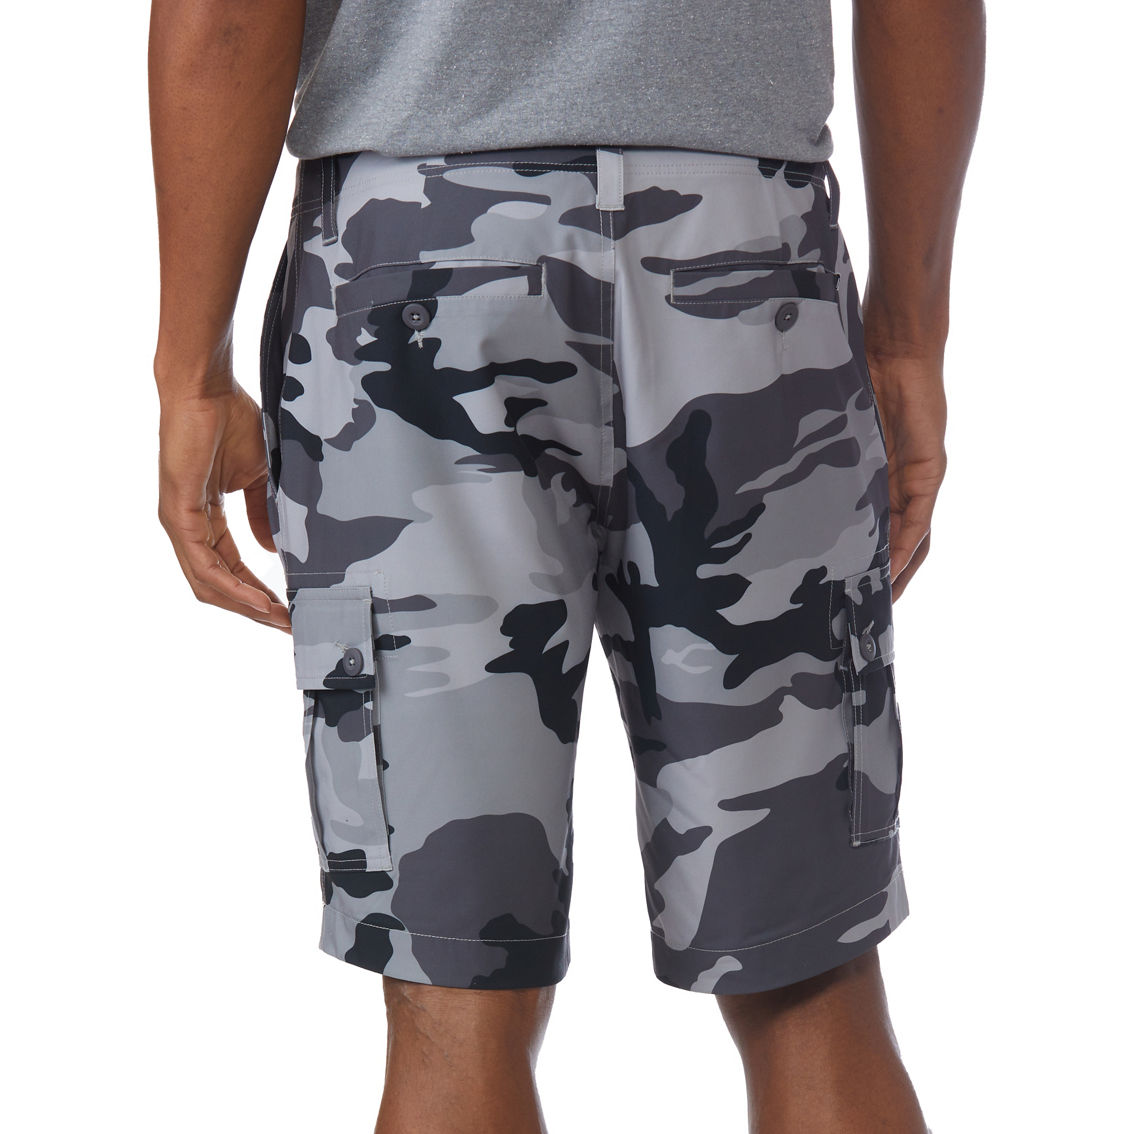 Wearfirst Stretch Poly Spandex Camo Cargo Shorts | Shorts | Clothing ...